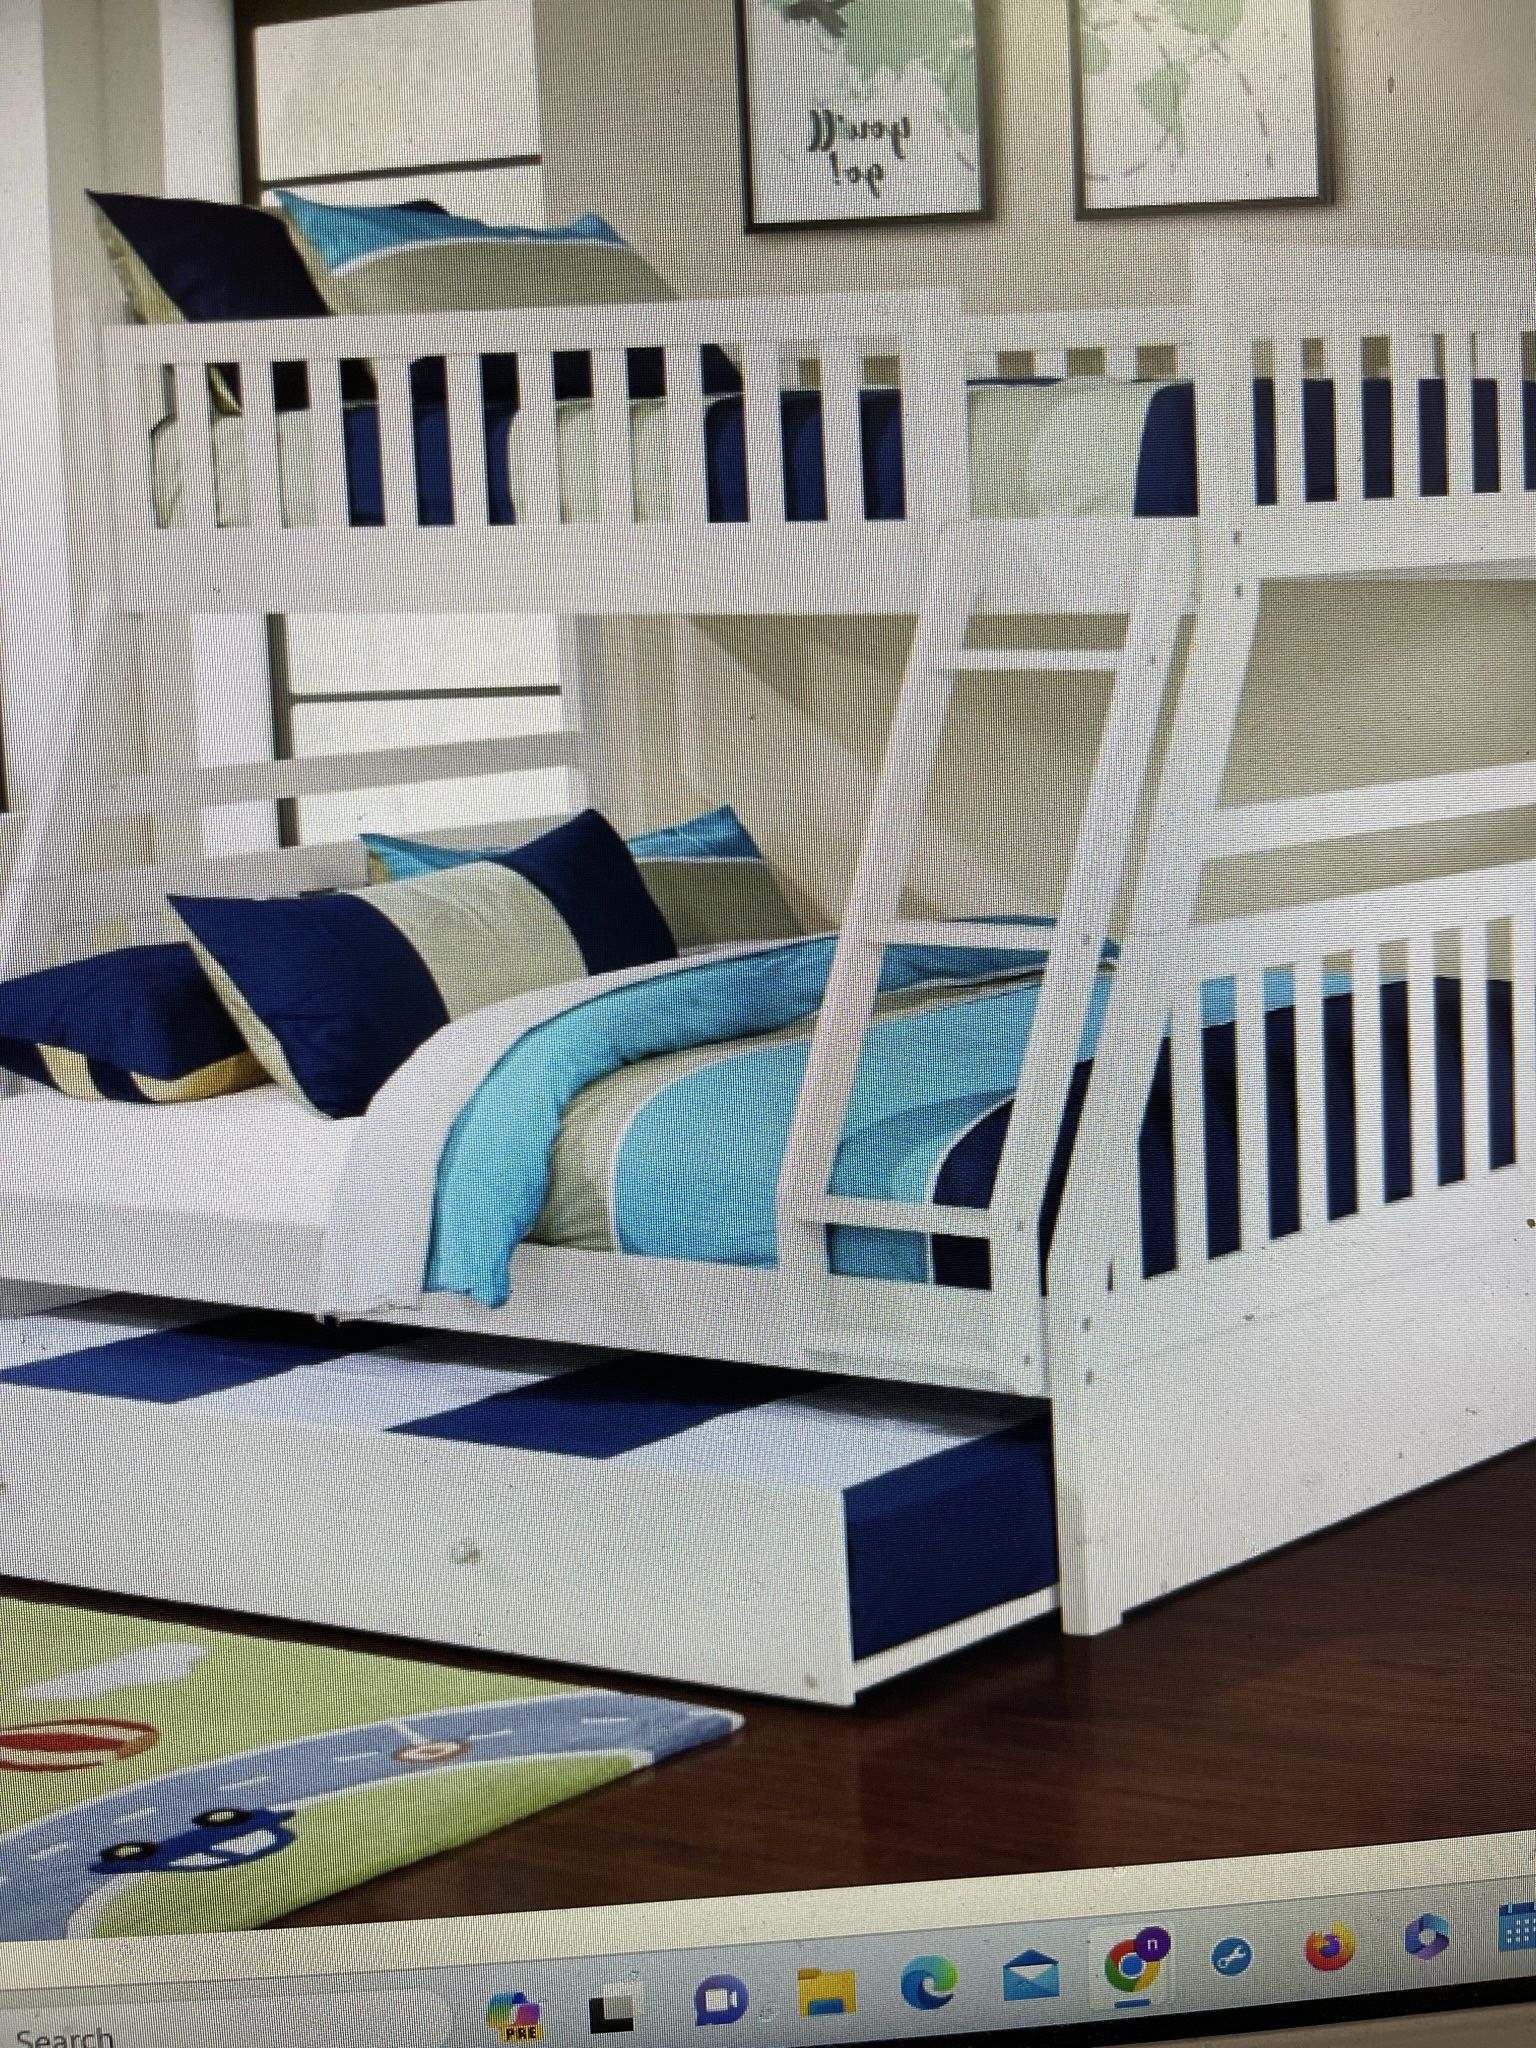 Twin Over Full Bunk Bed On Sale( Mattresses Sold Separately)